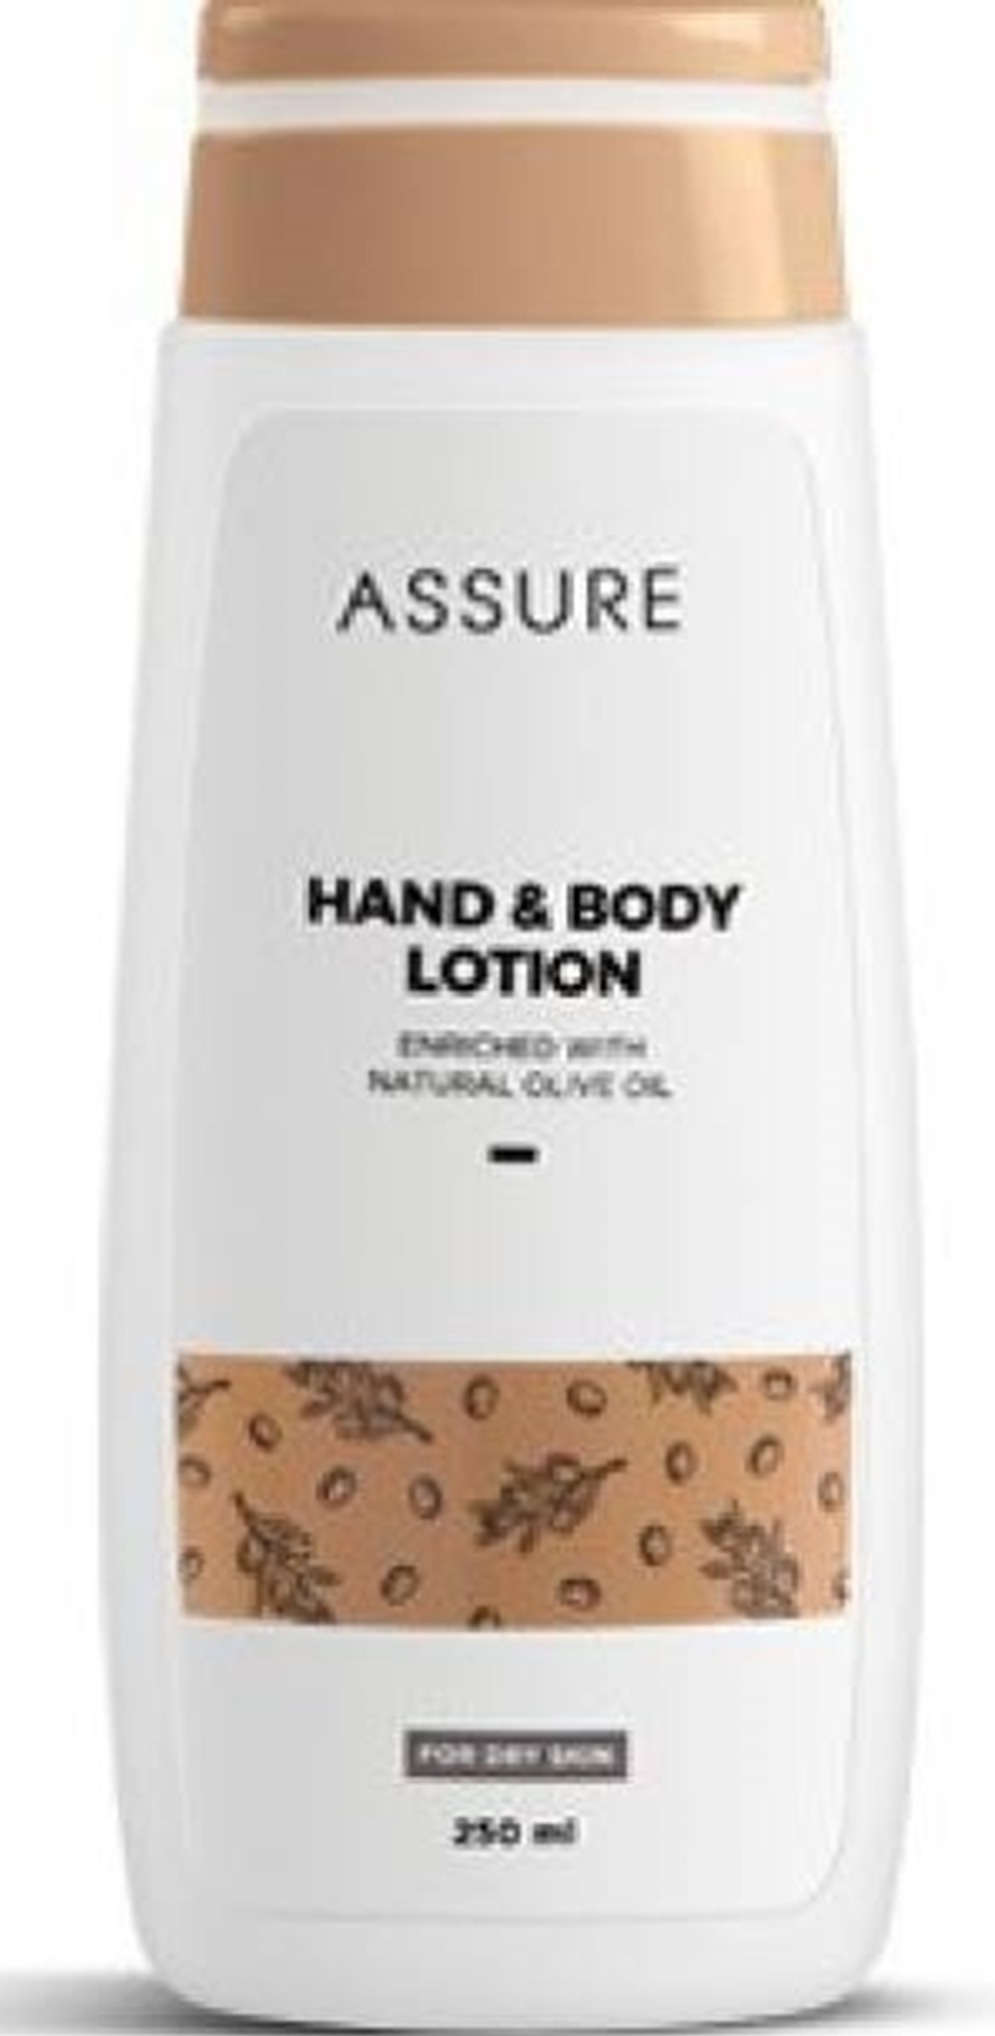 Assure Hand & Body Lotion